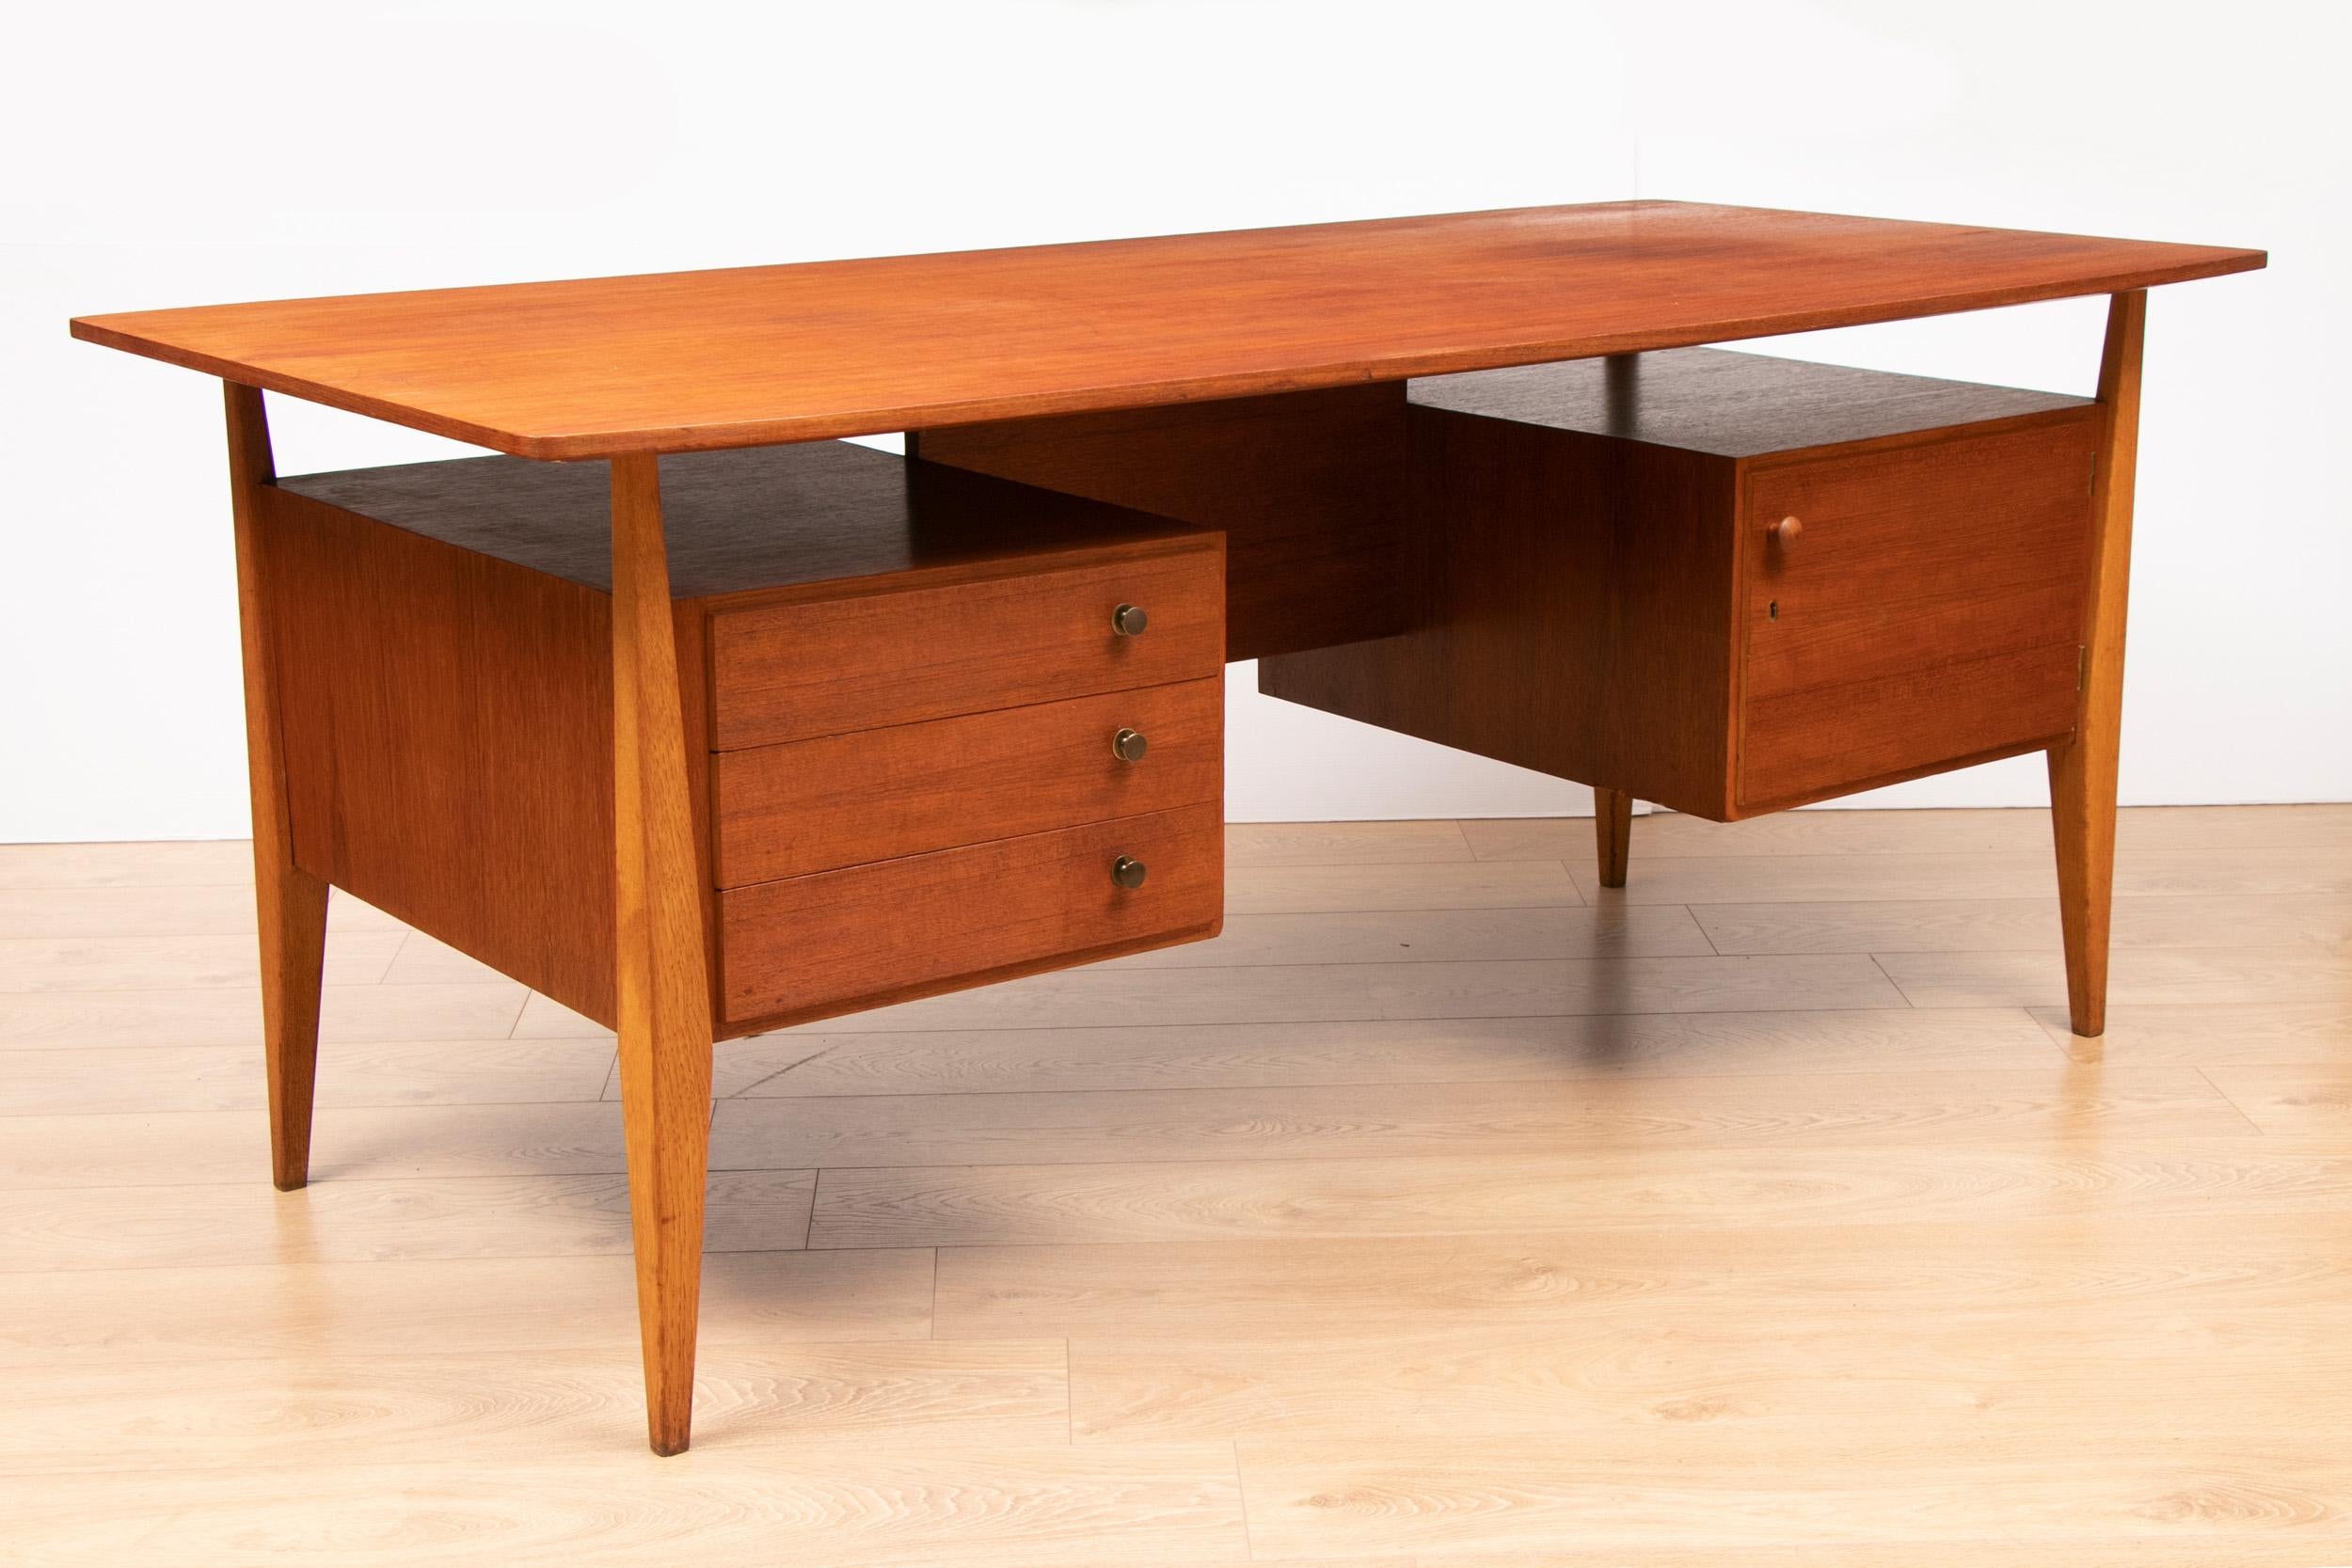 A gorgeous substantial midcentury teak executive floating desk with bookshelf. Stunning grain on worktop that floats on sculptured legs. 3 drawers and a cabinet with lock and key. Bookshelf on the back. Manufacturer unknown but there appears to be